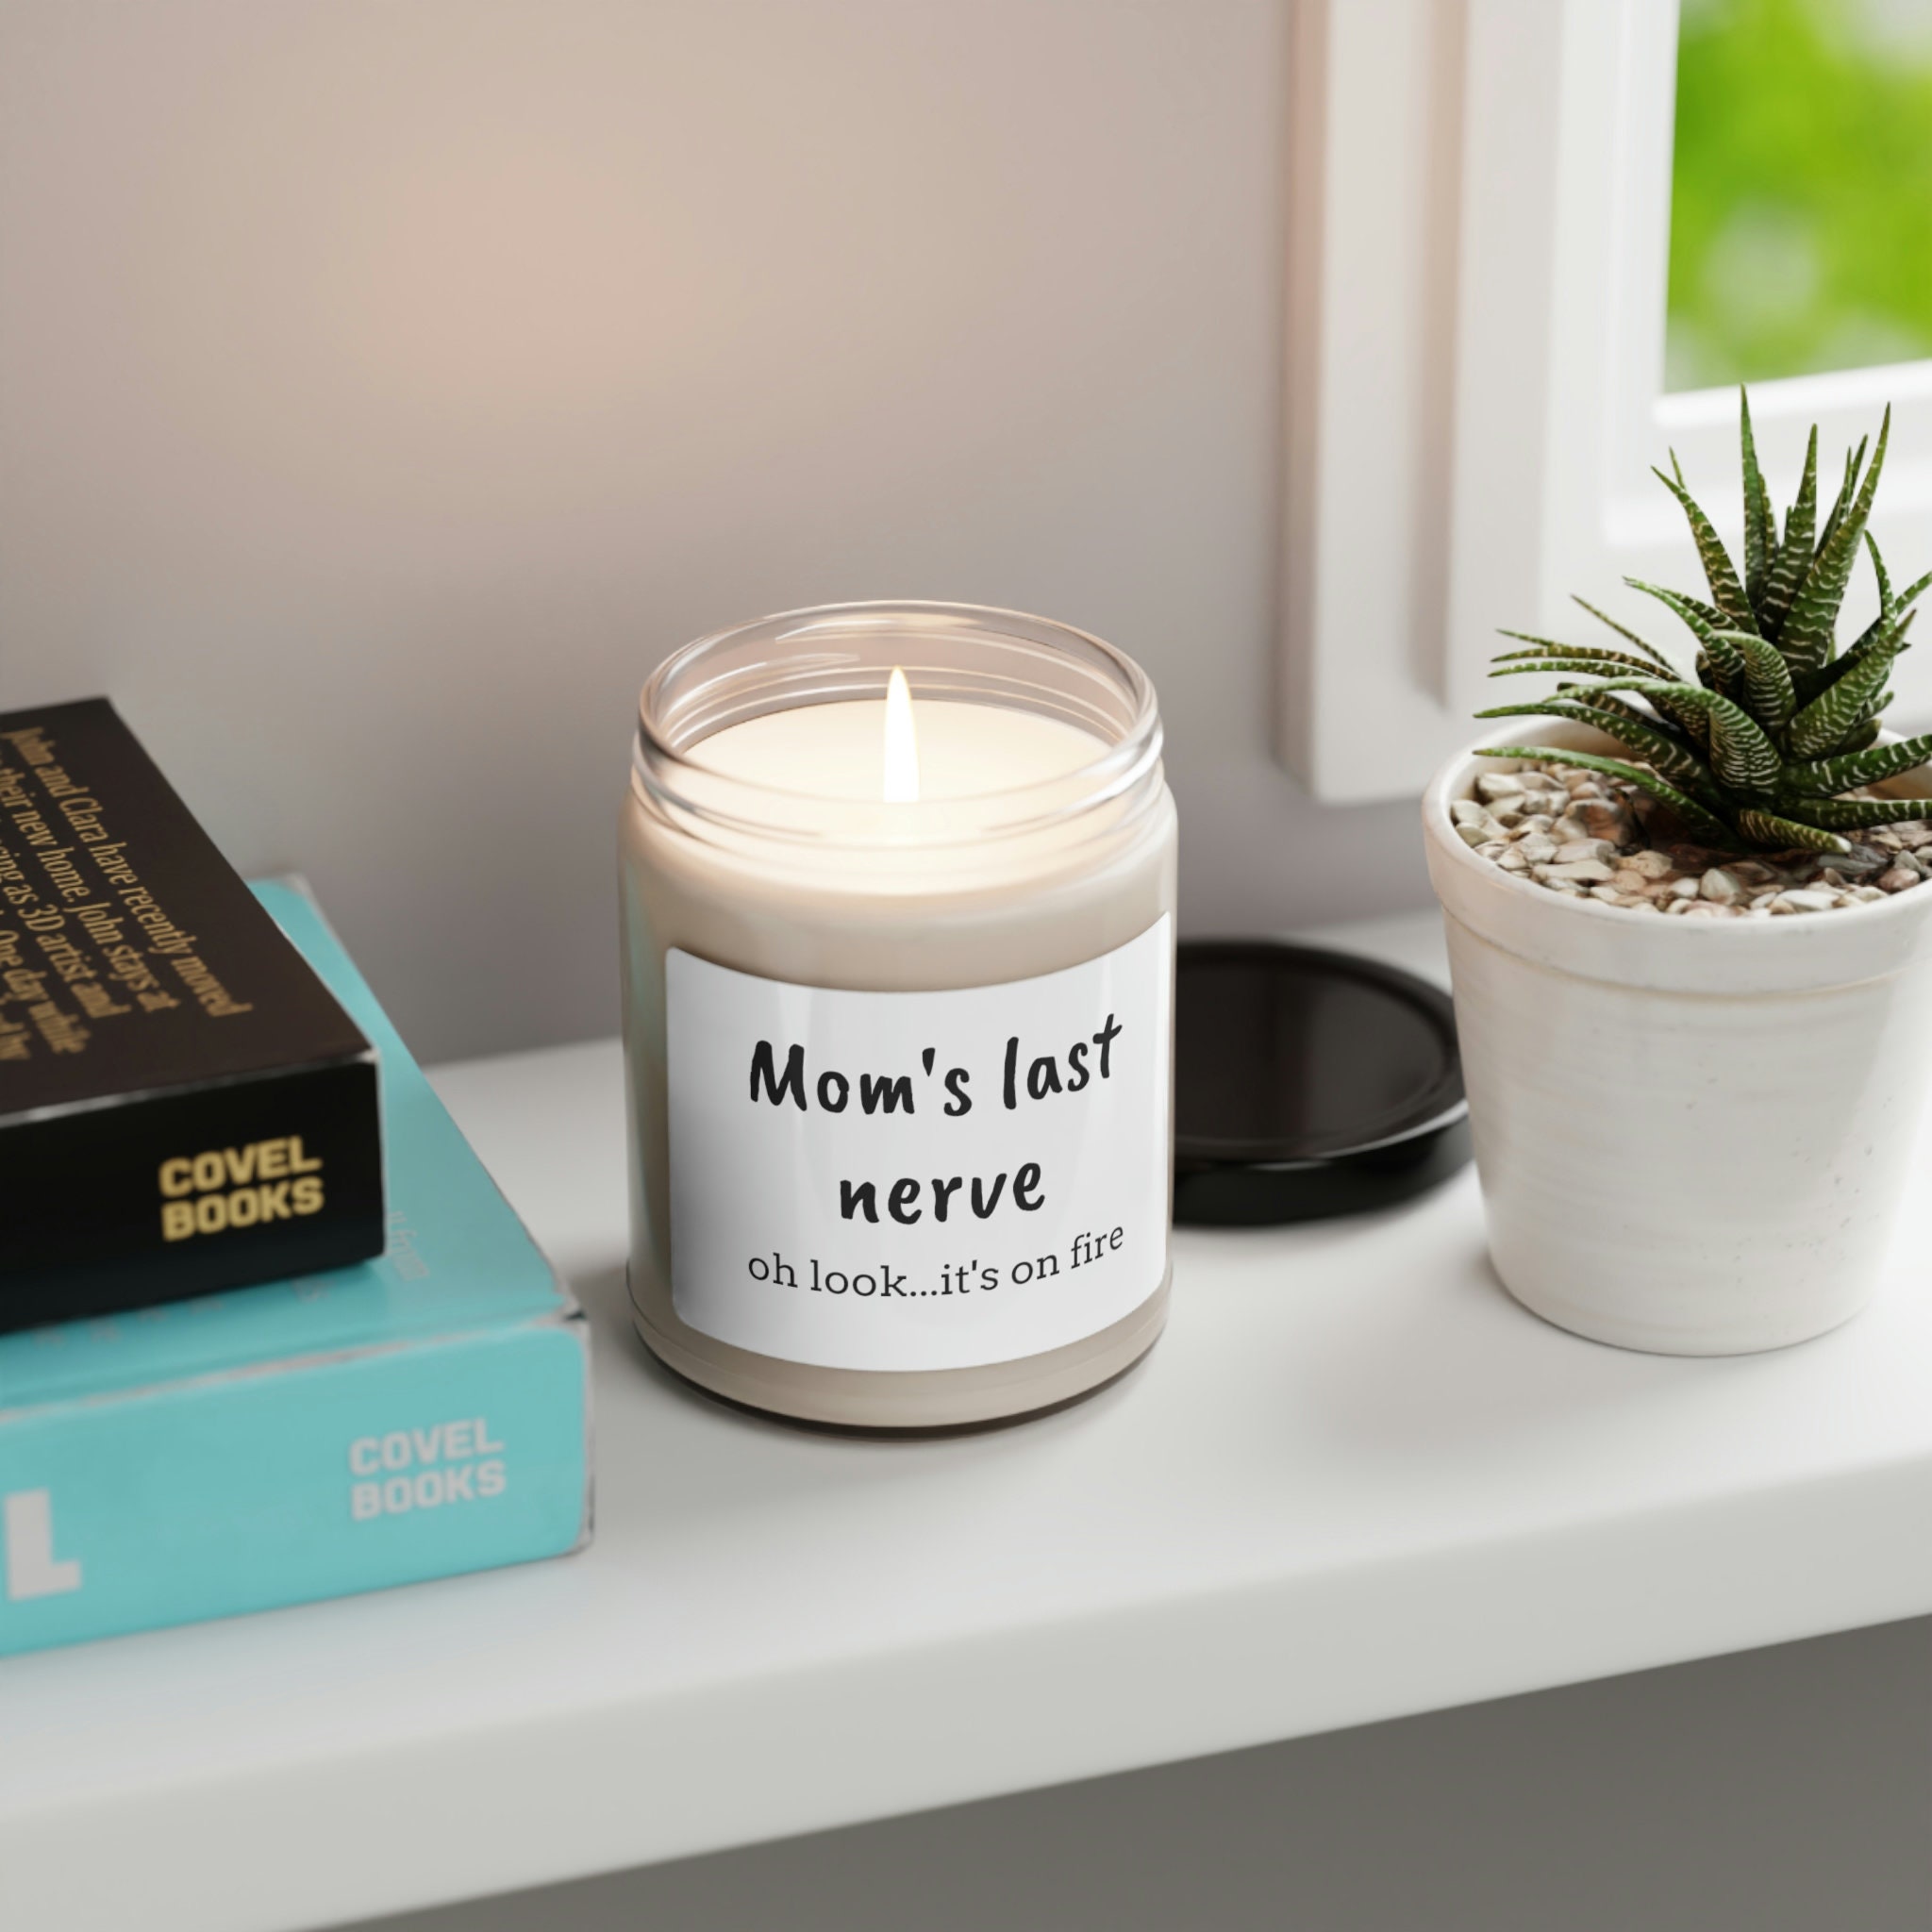 Mom's Last Nerve, Personalized Gift For Mom, Soy Candle, Funny Mother's Day  Gift, Anniversary Gift For Him, Mothers Day Candle, 9 Oz Vanilla Scented -  Best Canvas Wall Art